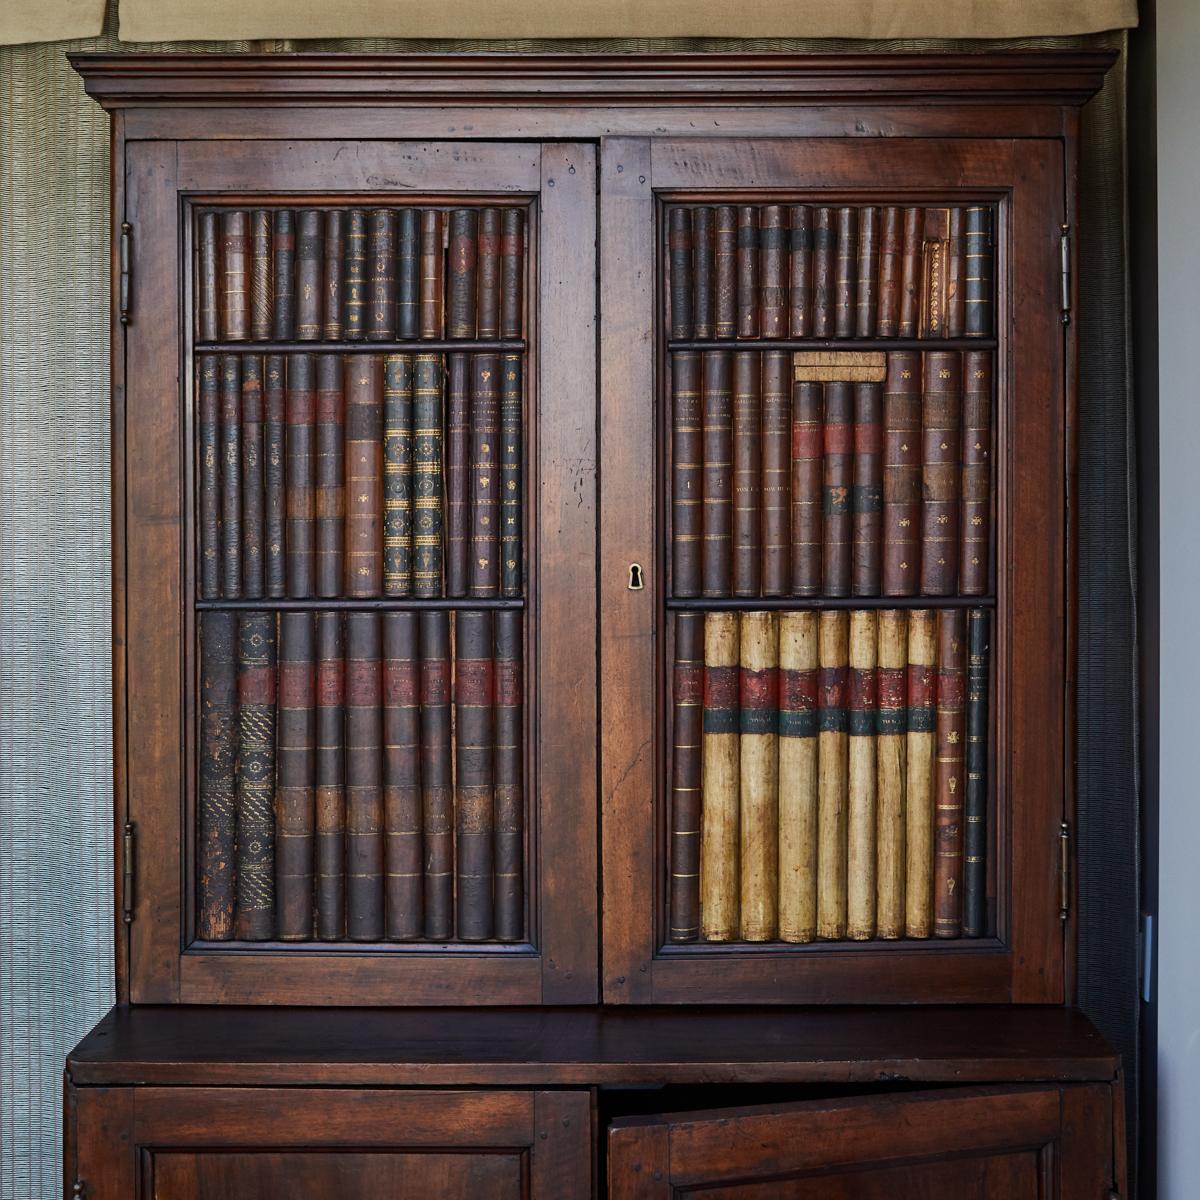 Early 19th-century Italian wooden cupboard with the unique feature of trompe l'oeil carved book spines, giving the appearance of a full library. The acquired patina has further enhanced this effect, accentuating the craftsmanship at play.

Italy,